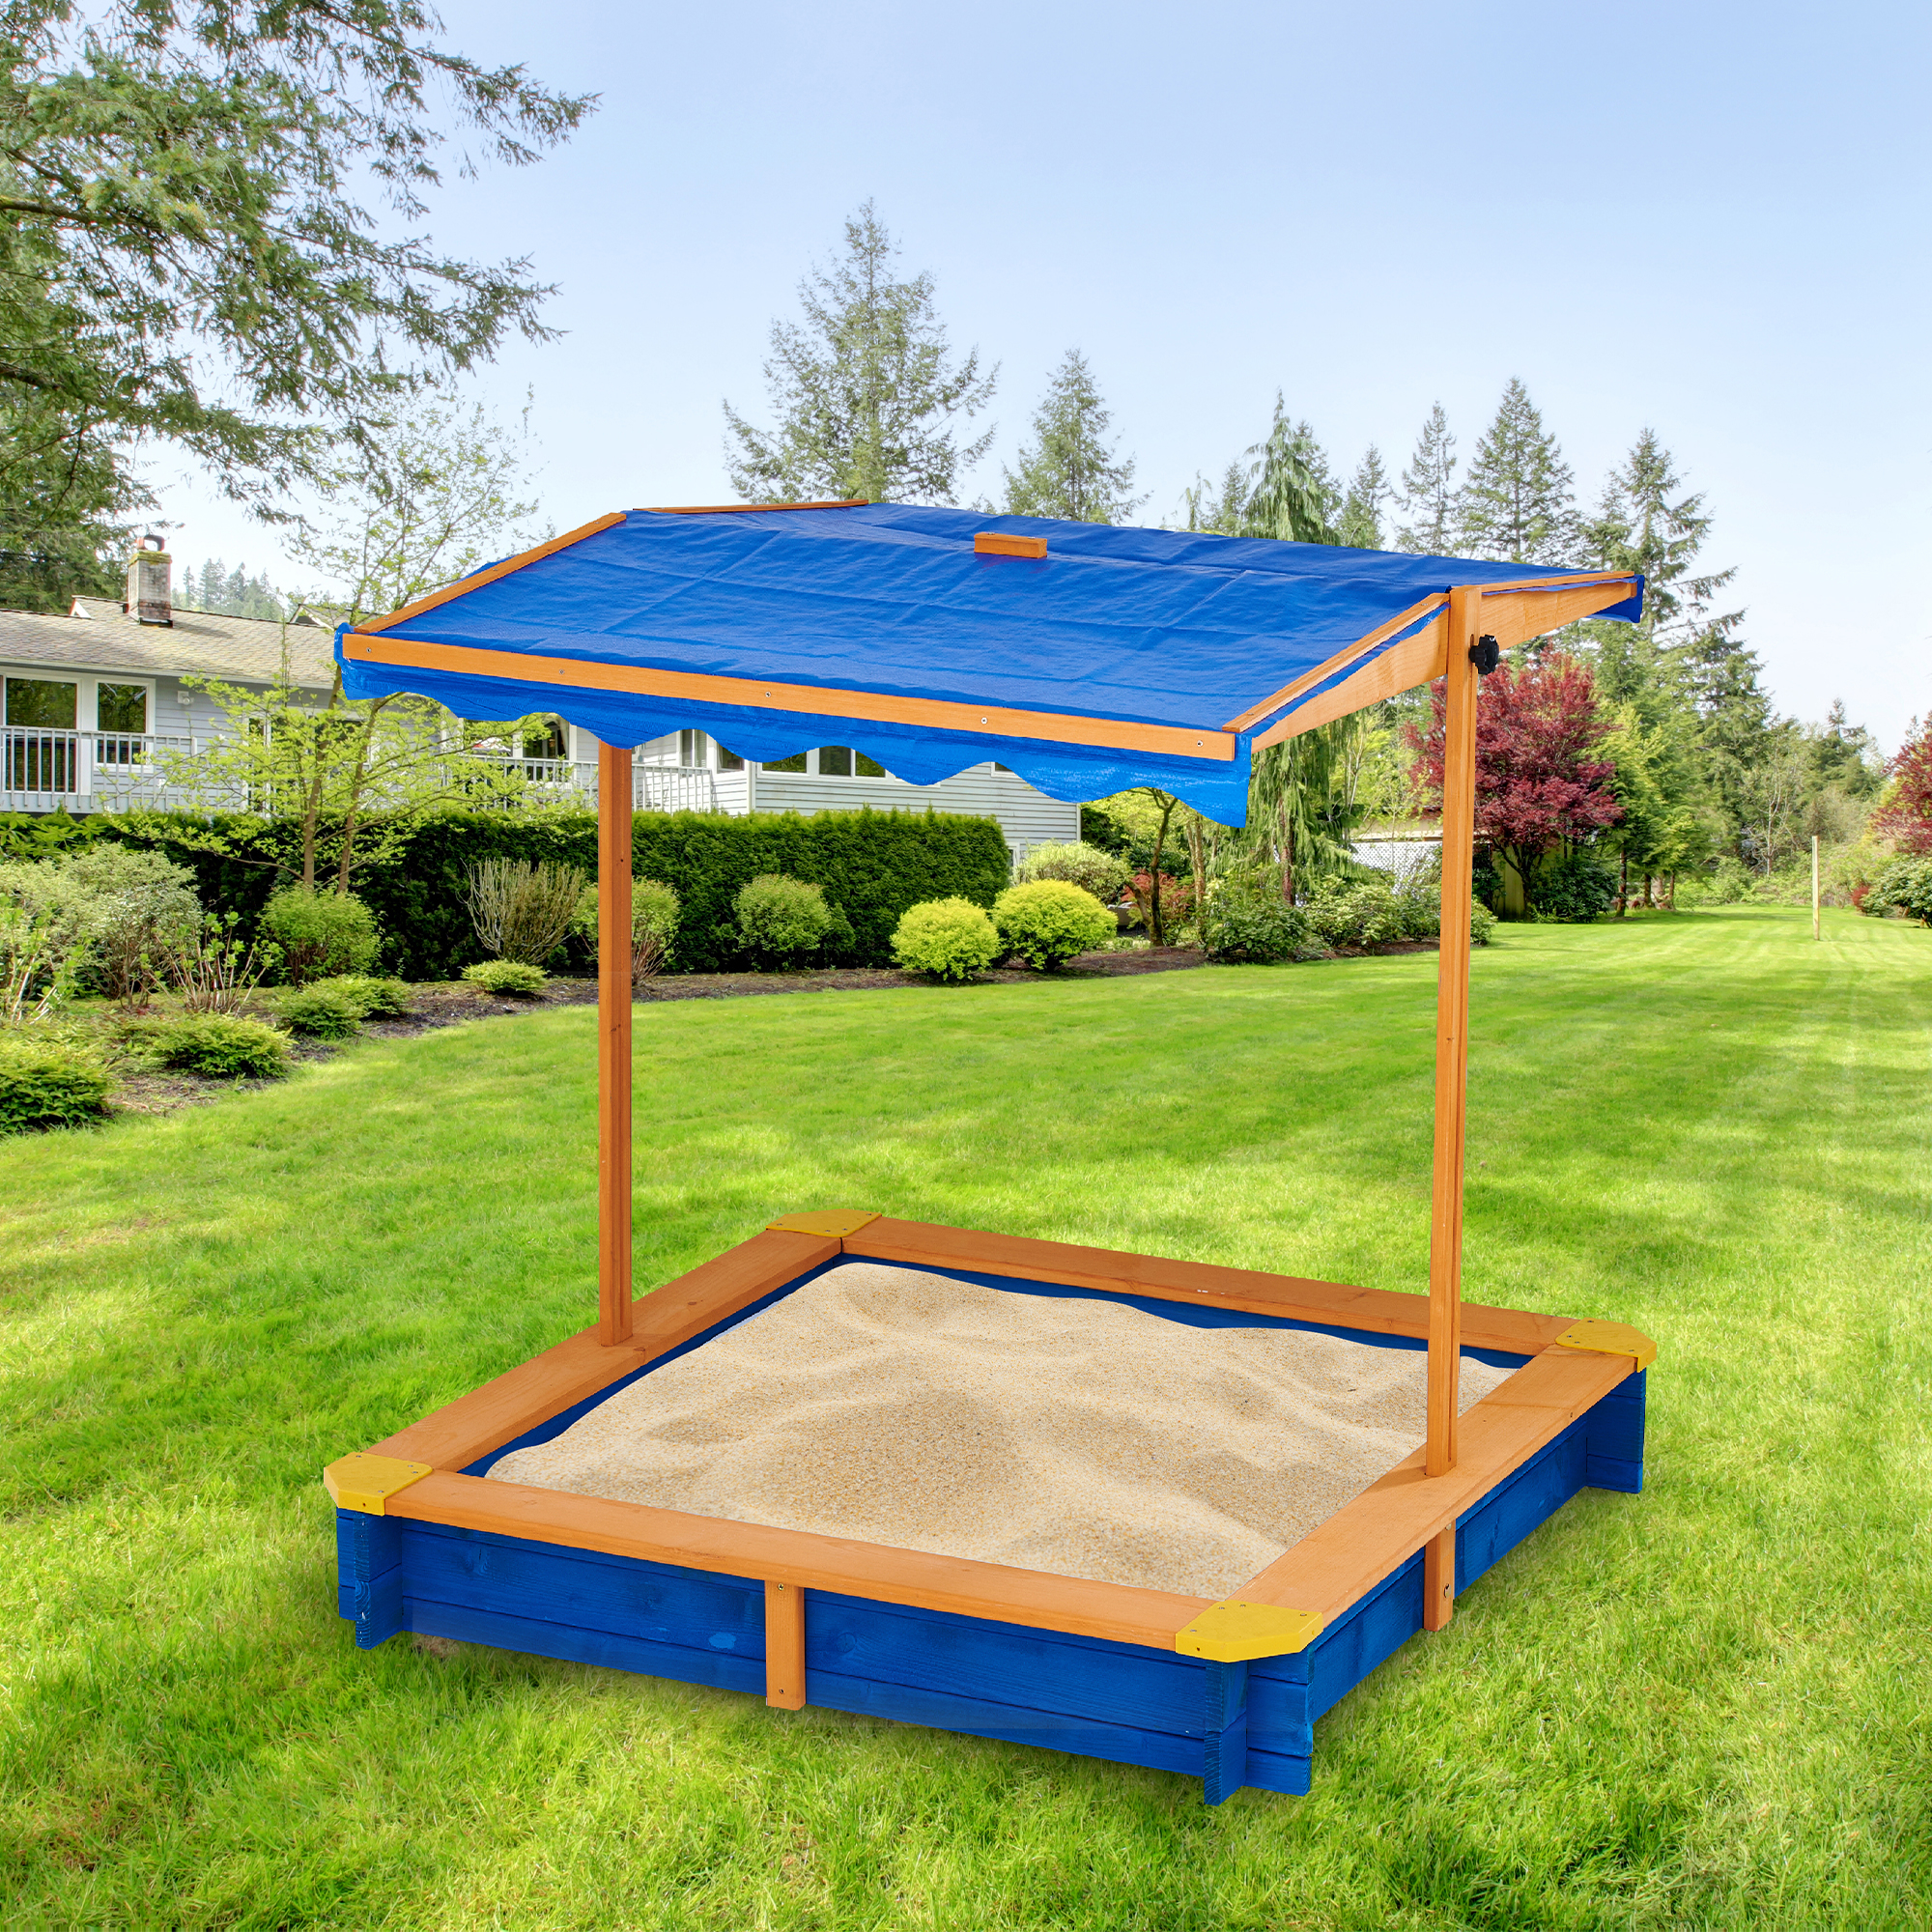 46" x 6" Solid Wood Square Blue Sandbox with Cover